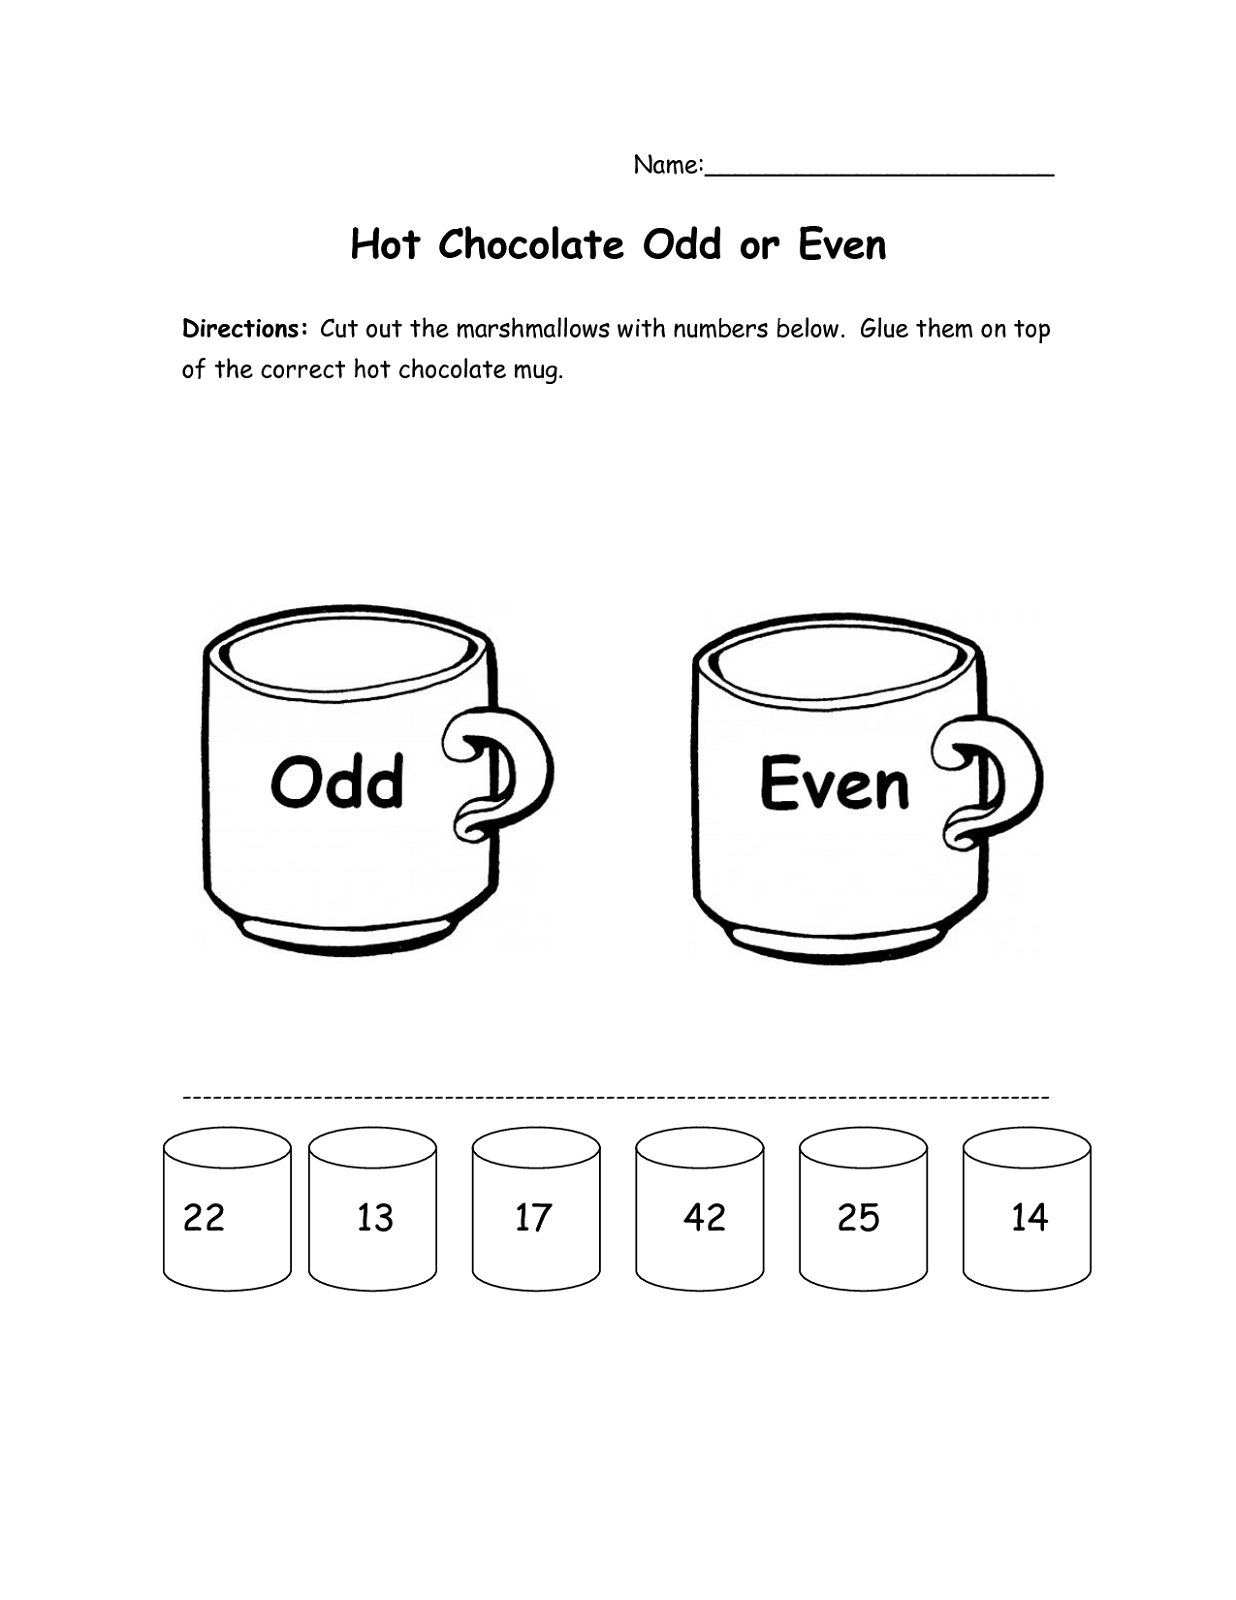 odd-and-even-numbers-worksheets-activity-shelter